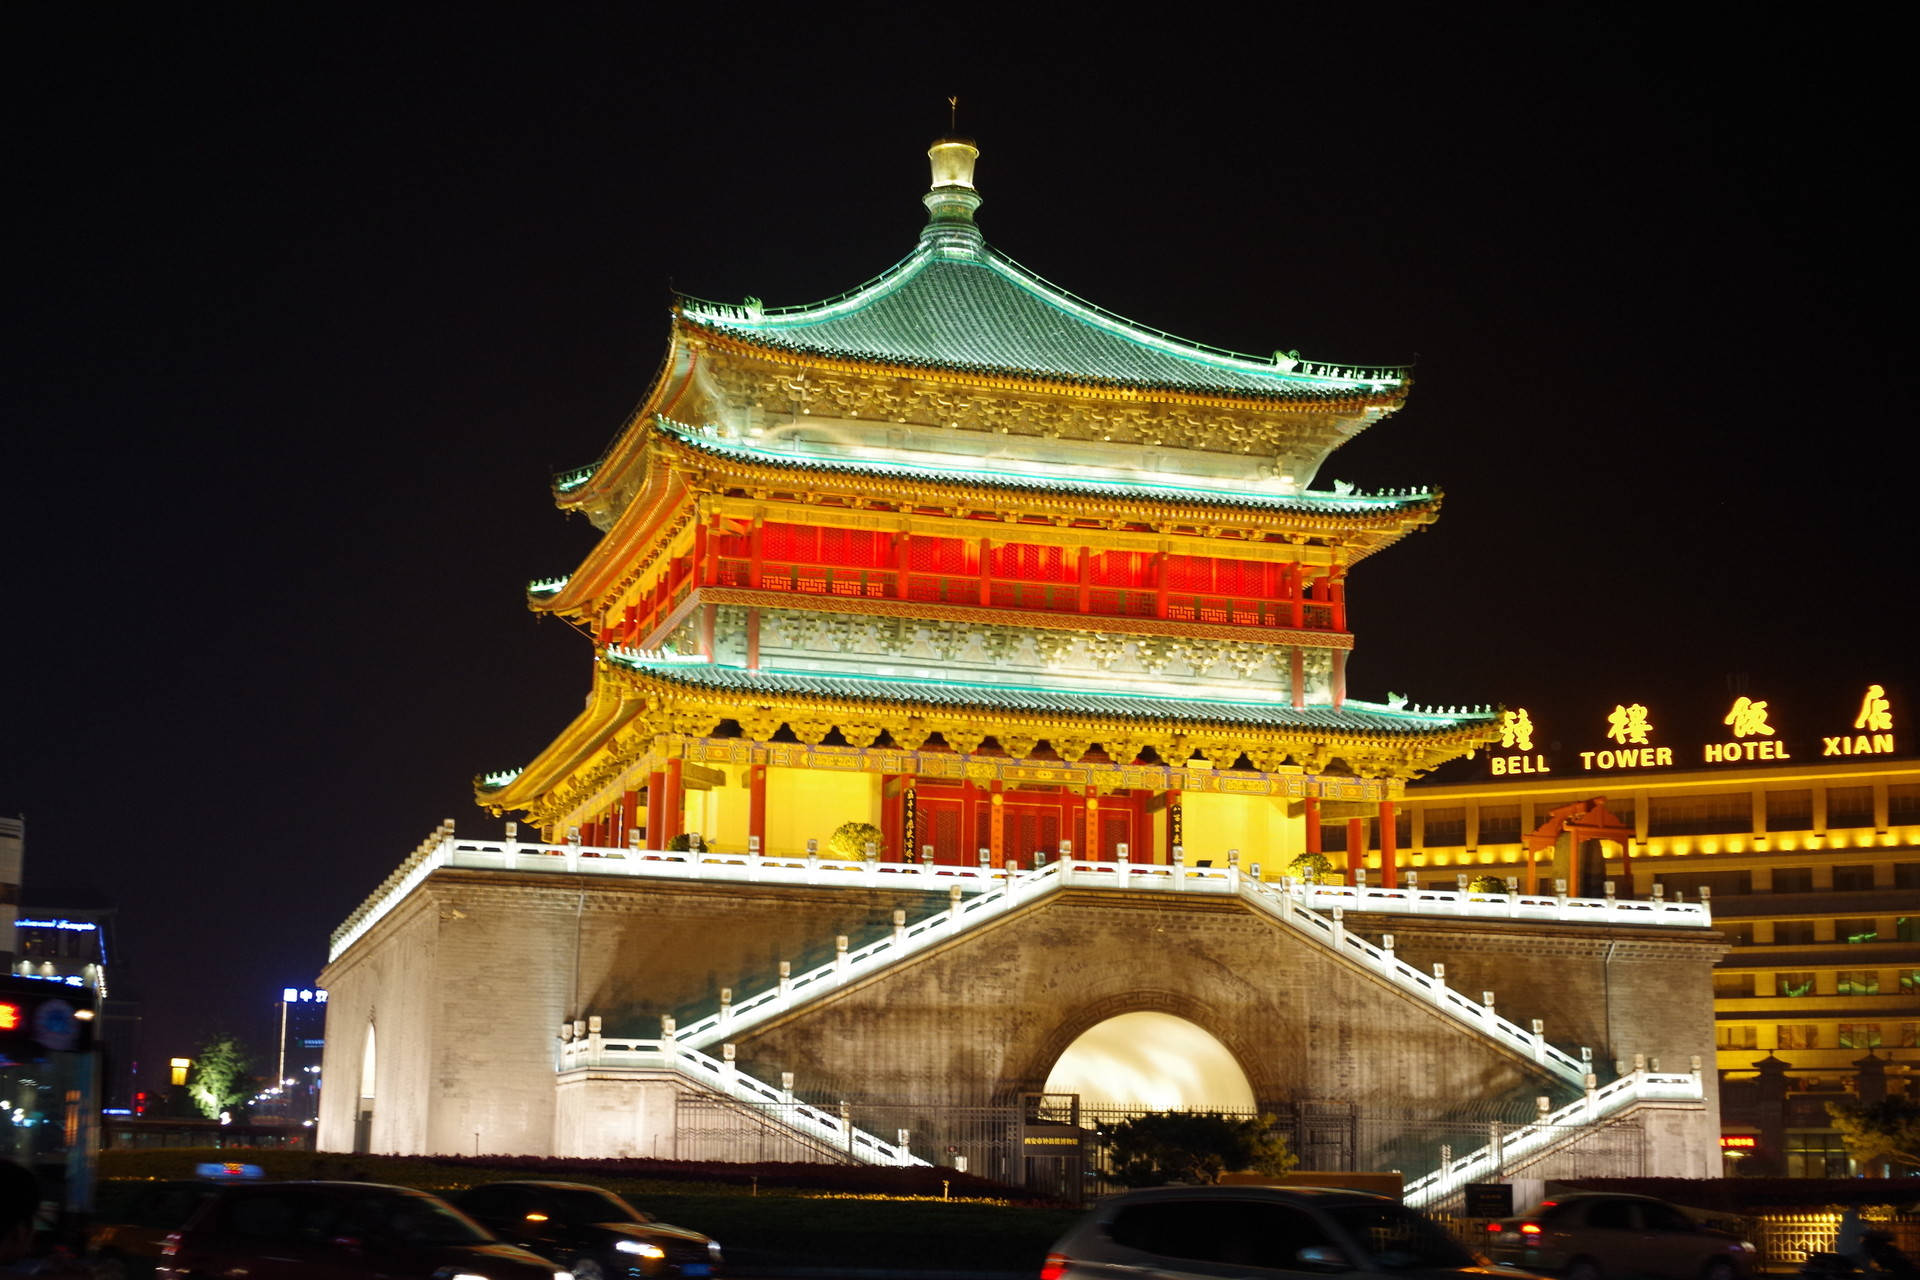 Colorful Bell Tower Of Xian